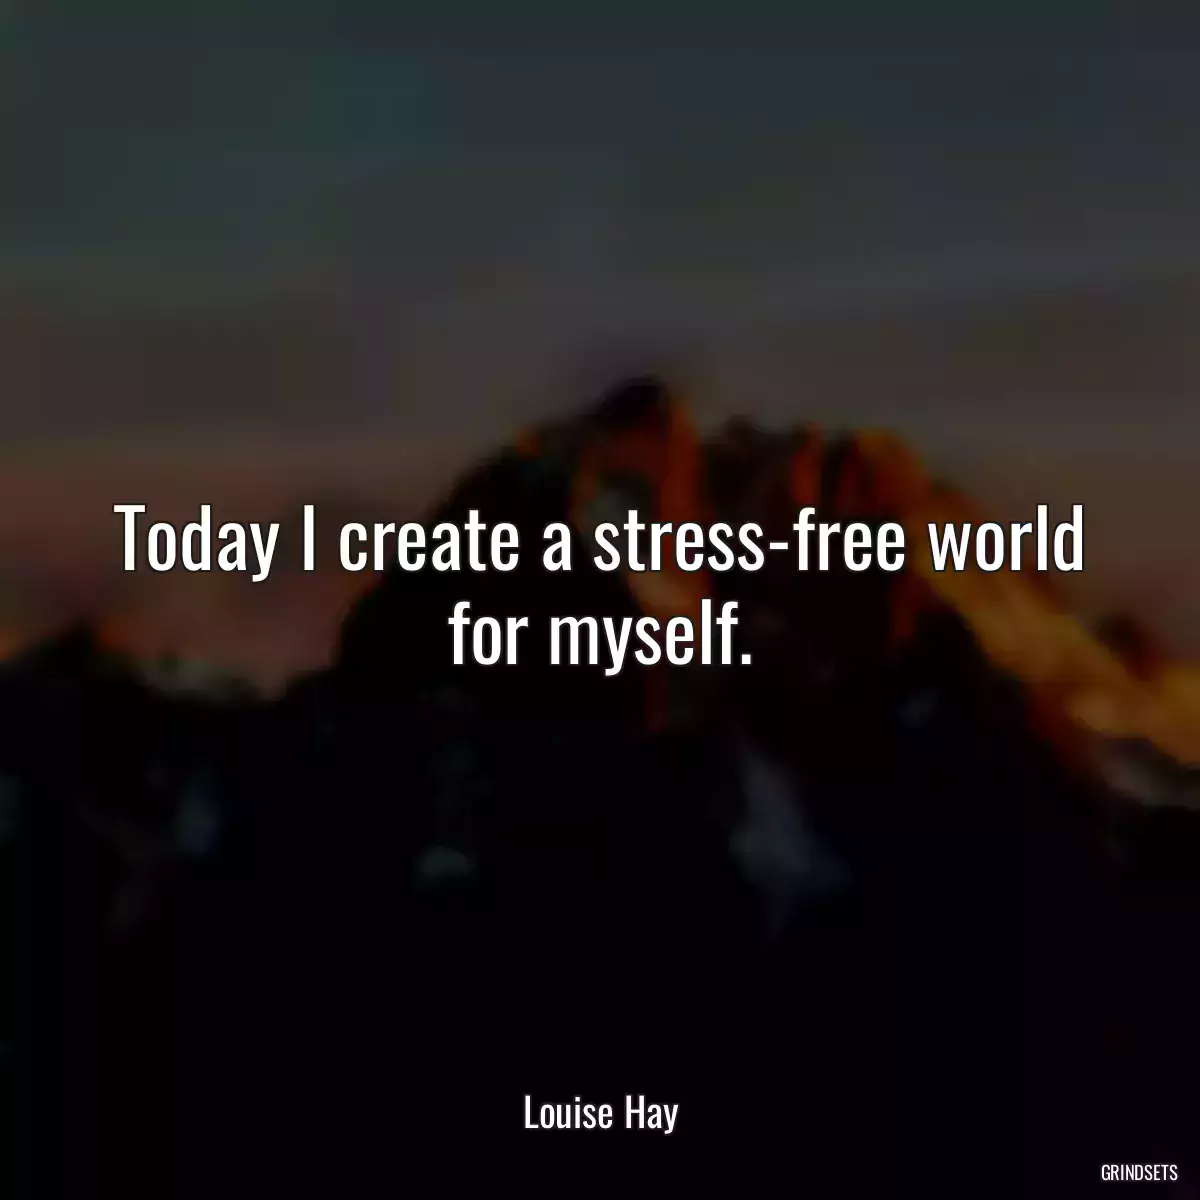 Today I create a stress-free world for myself.